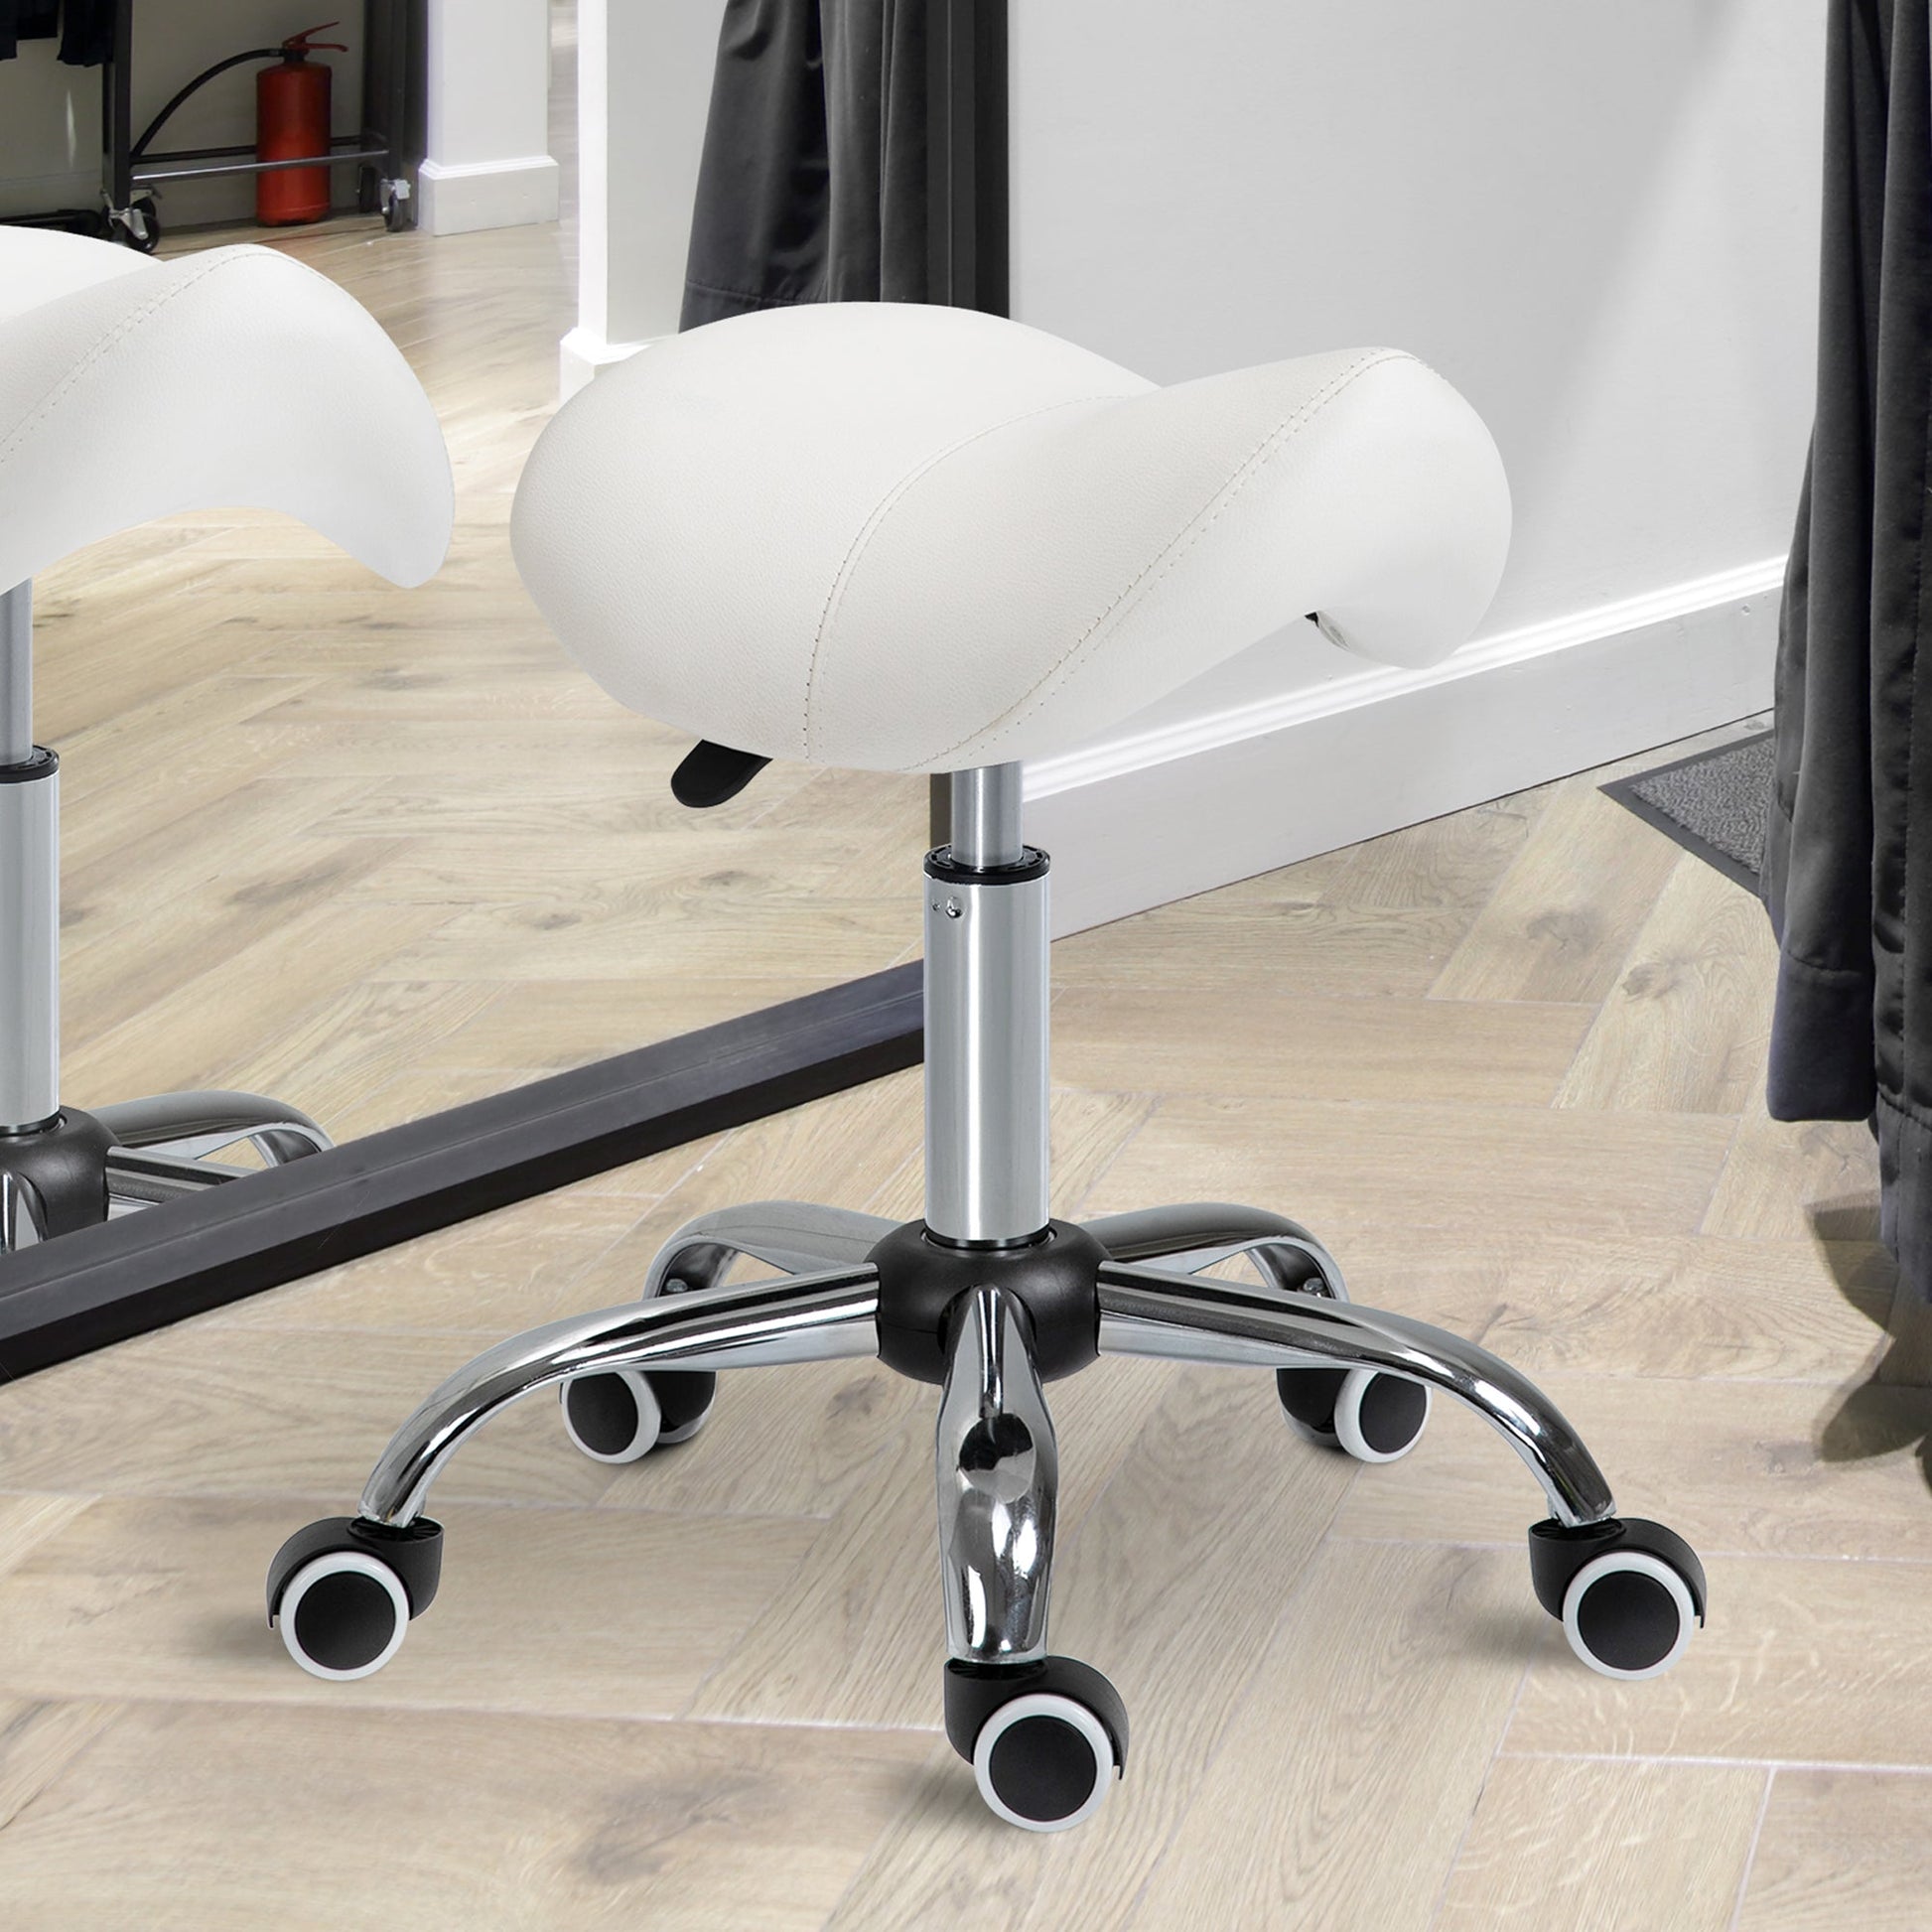 Adjustable Hydraulic Rolling Salon Stool Swivel Saddle Chair Spa Beauty Seat PU Leather, Cream White at Gallery Canada